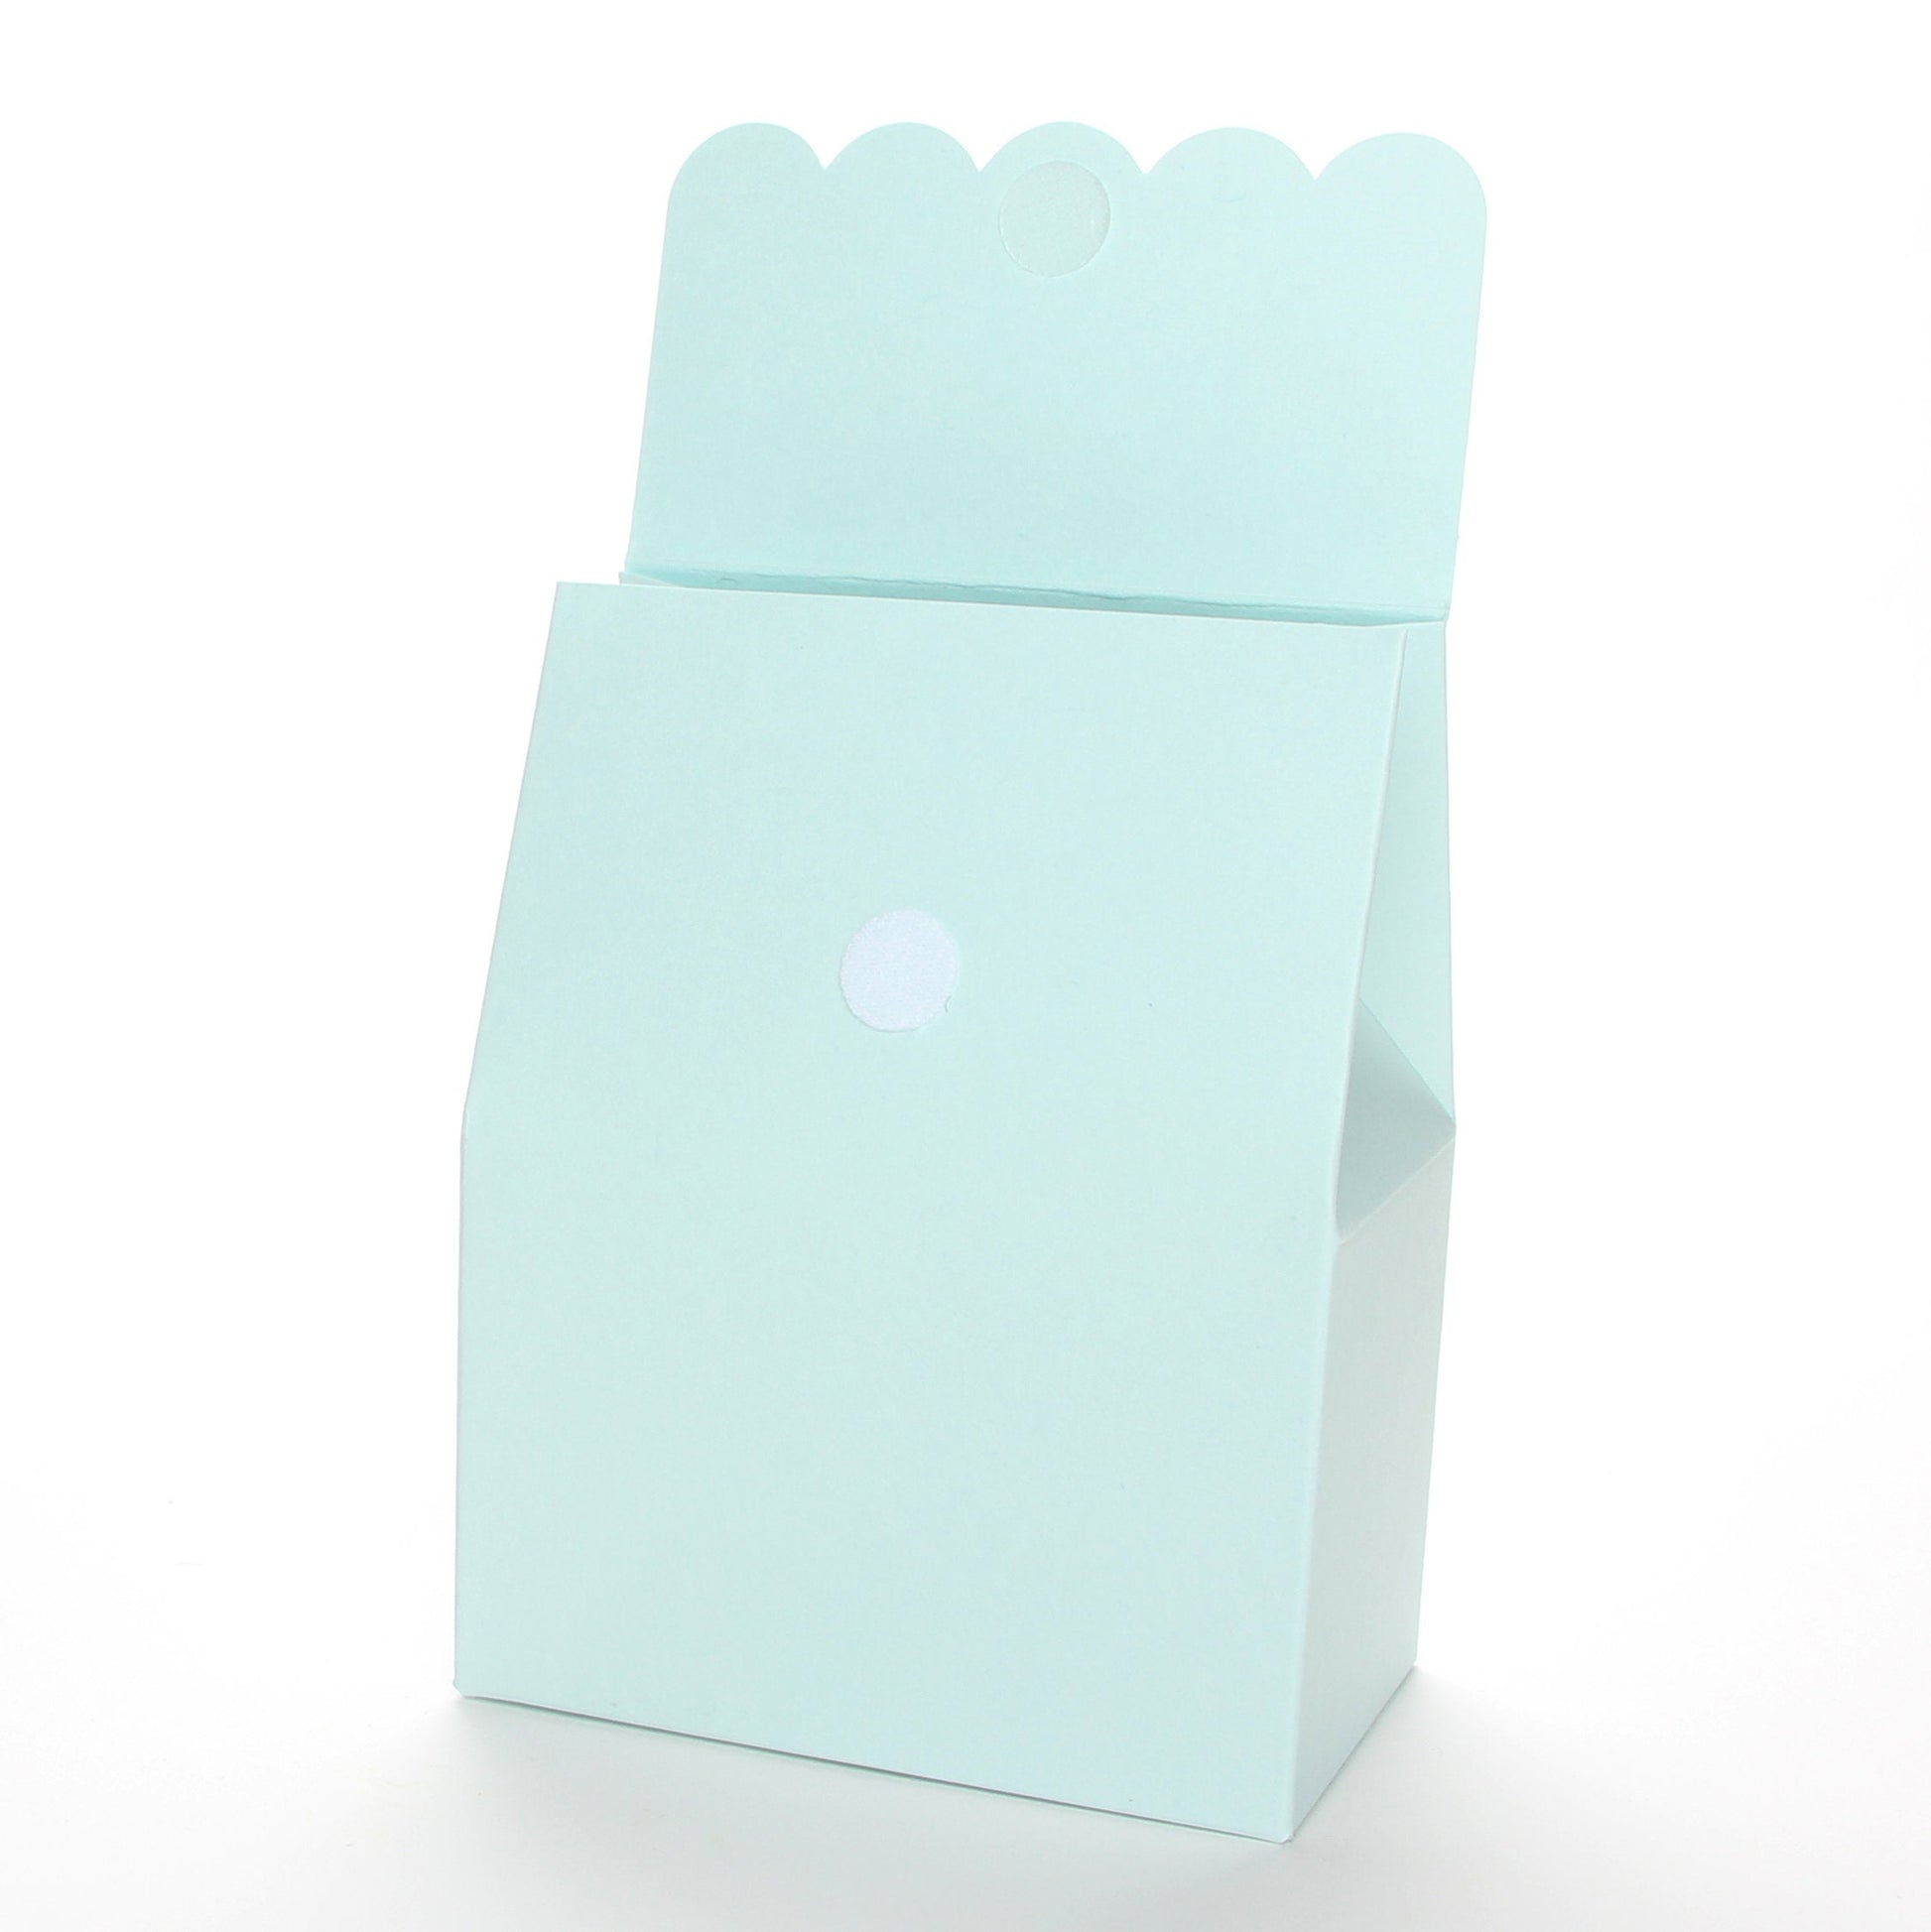 Lux Party’s light blue favor box with scalloped lid open, showing a velcro closure.